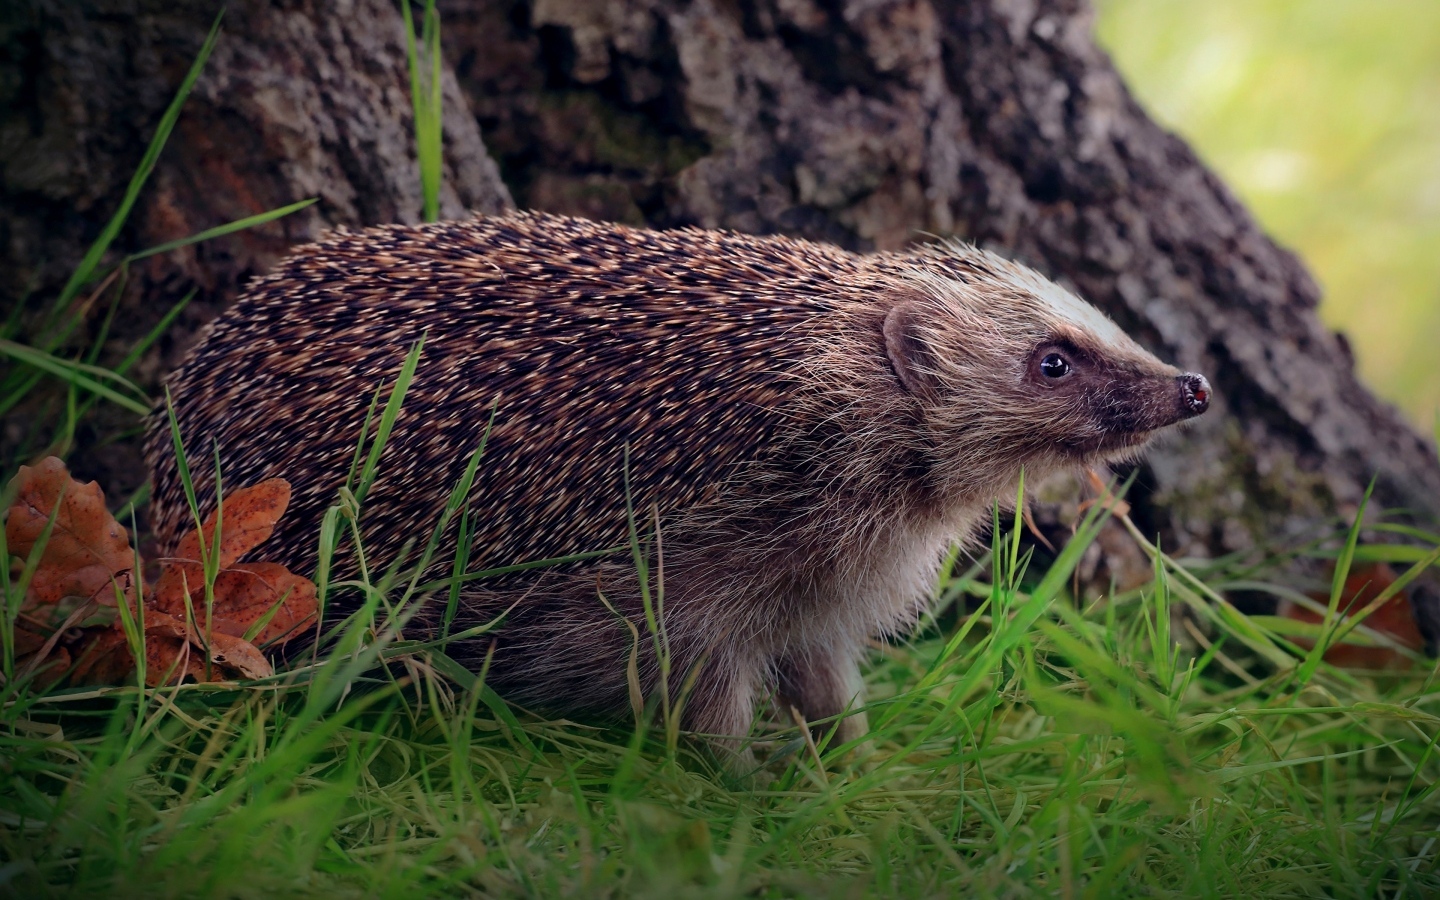 Old hedgehog on green grass under a tree